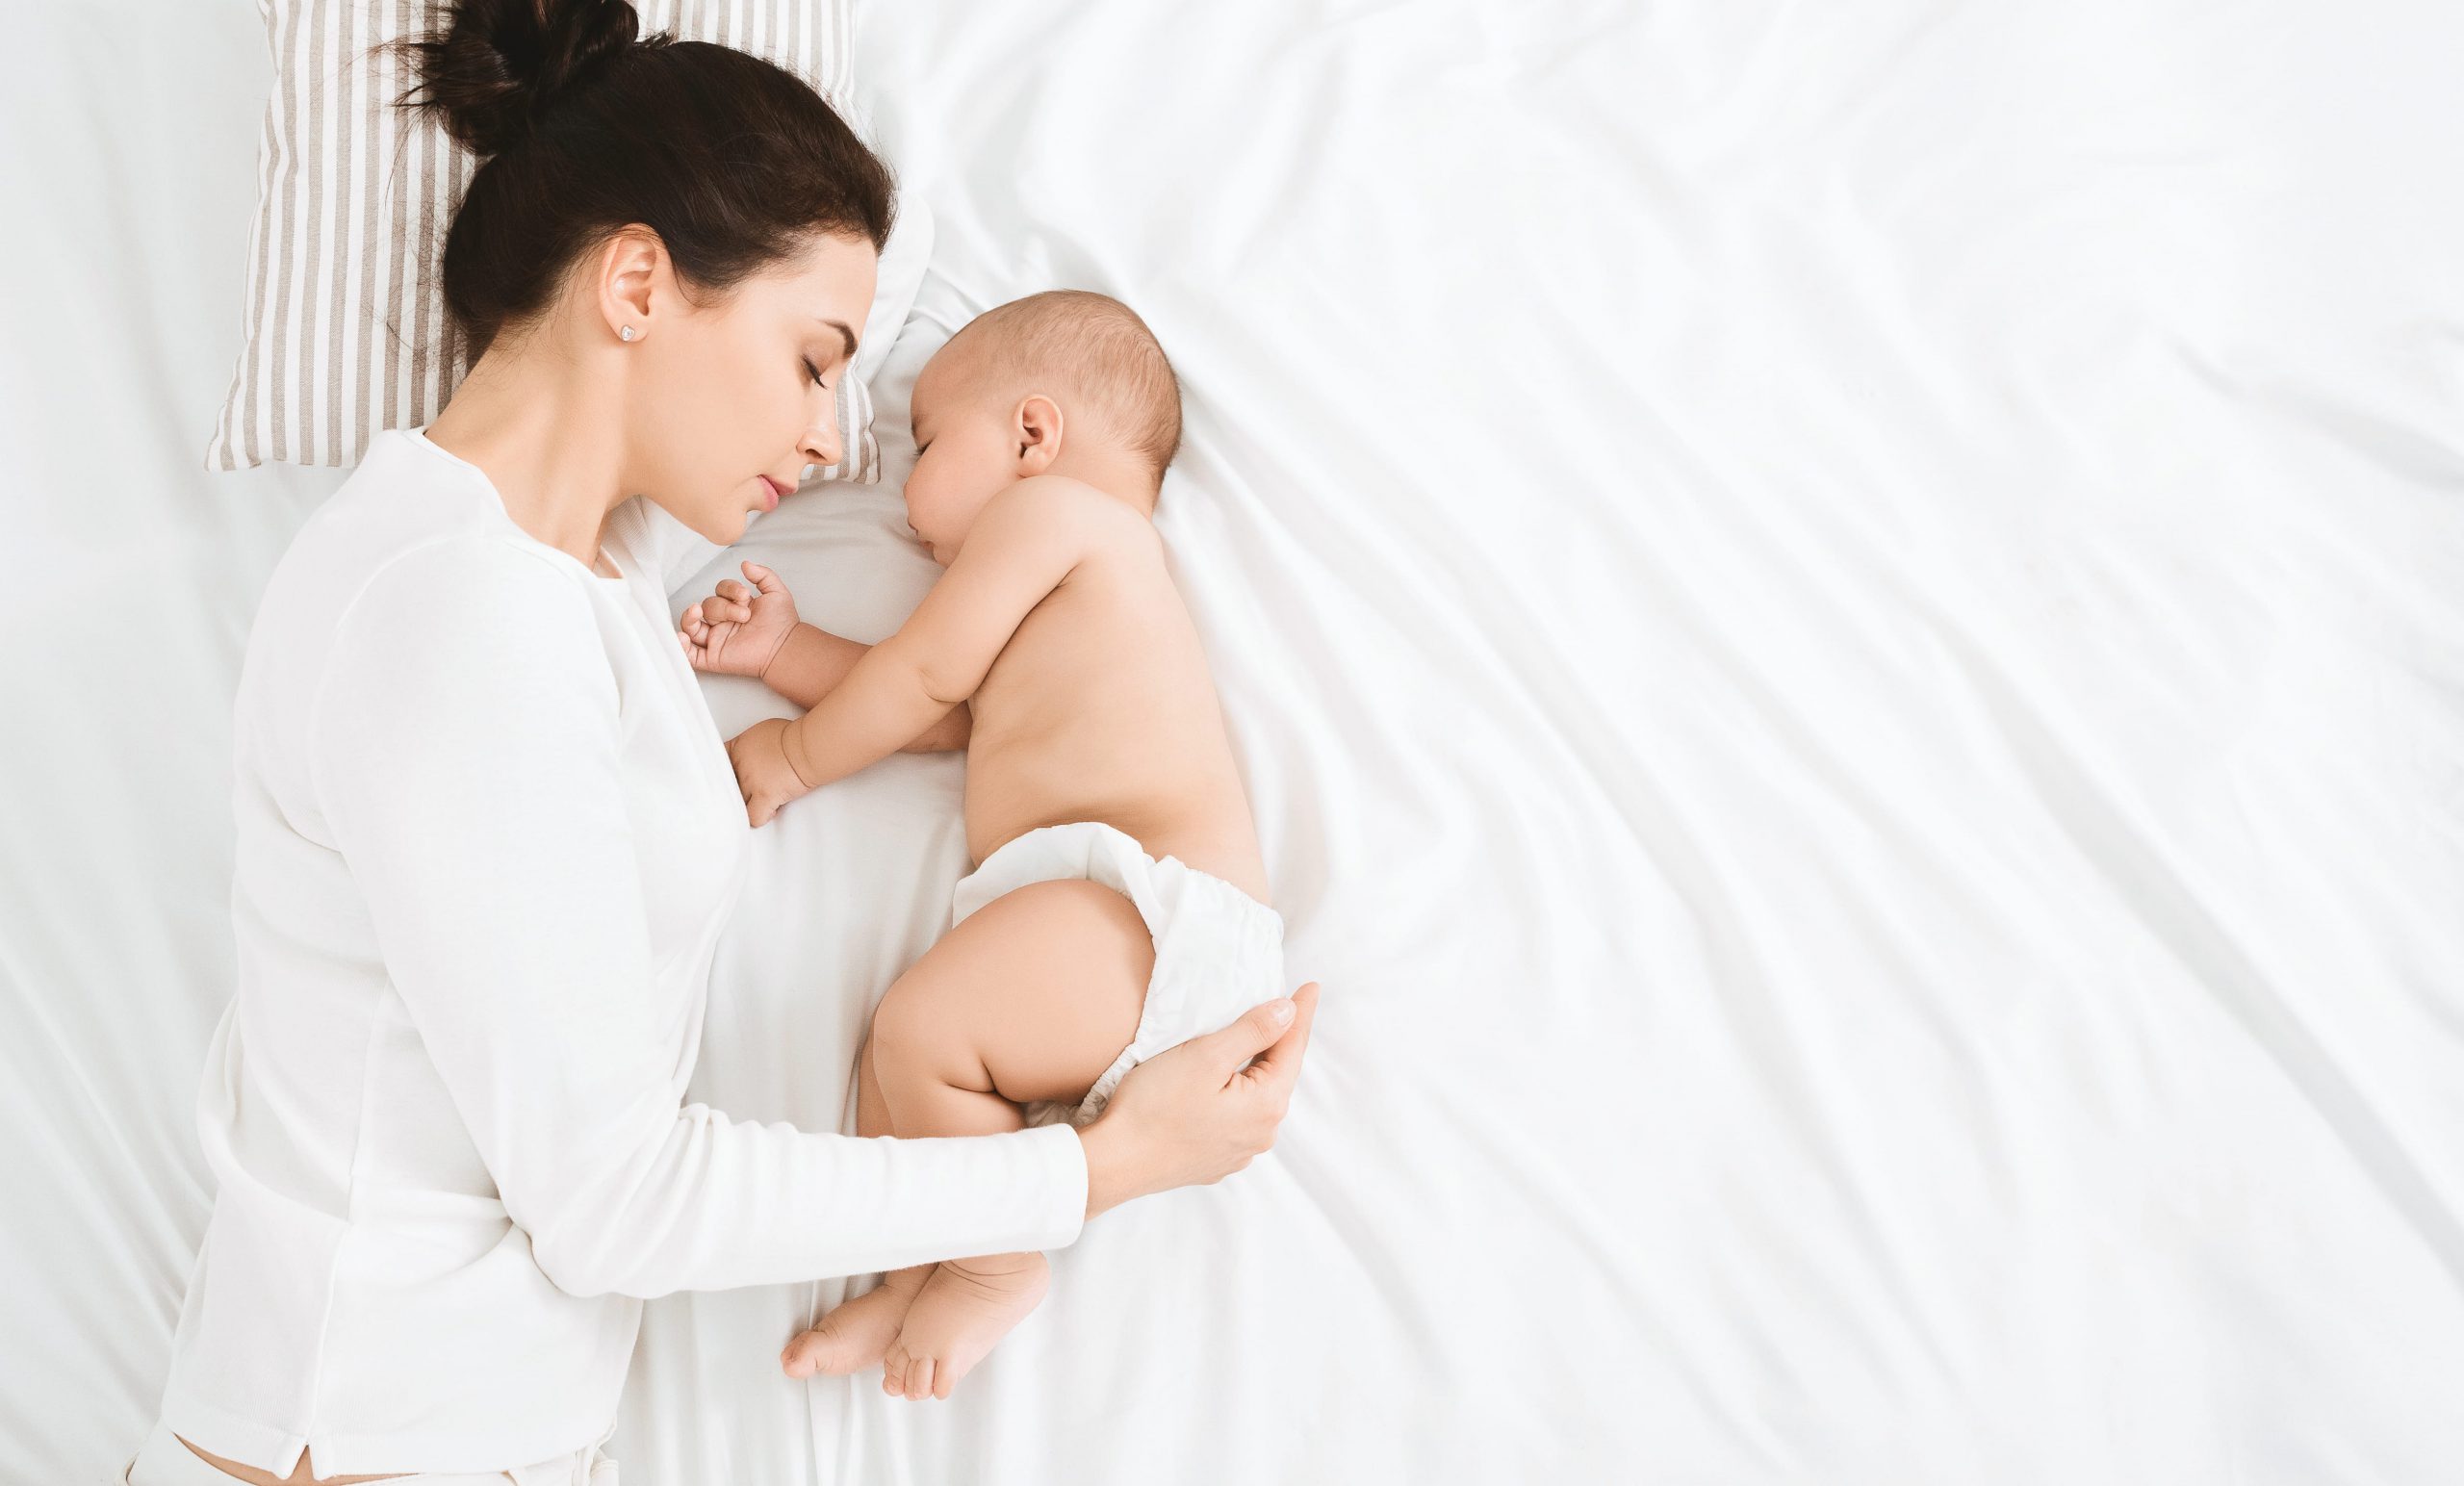 young mom and her cute baby sleeping in bed gb6jkys min scaled